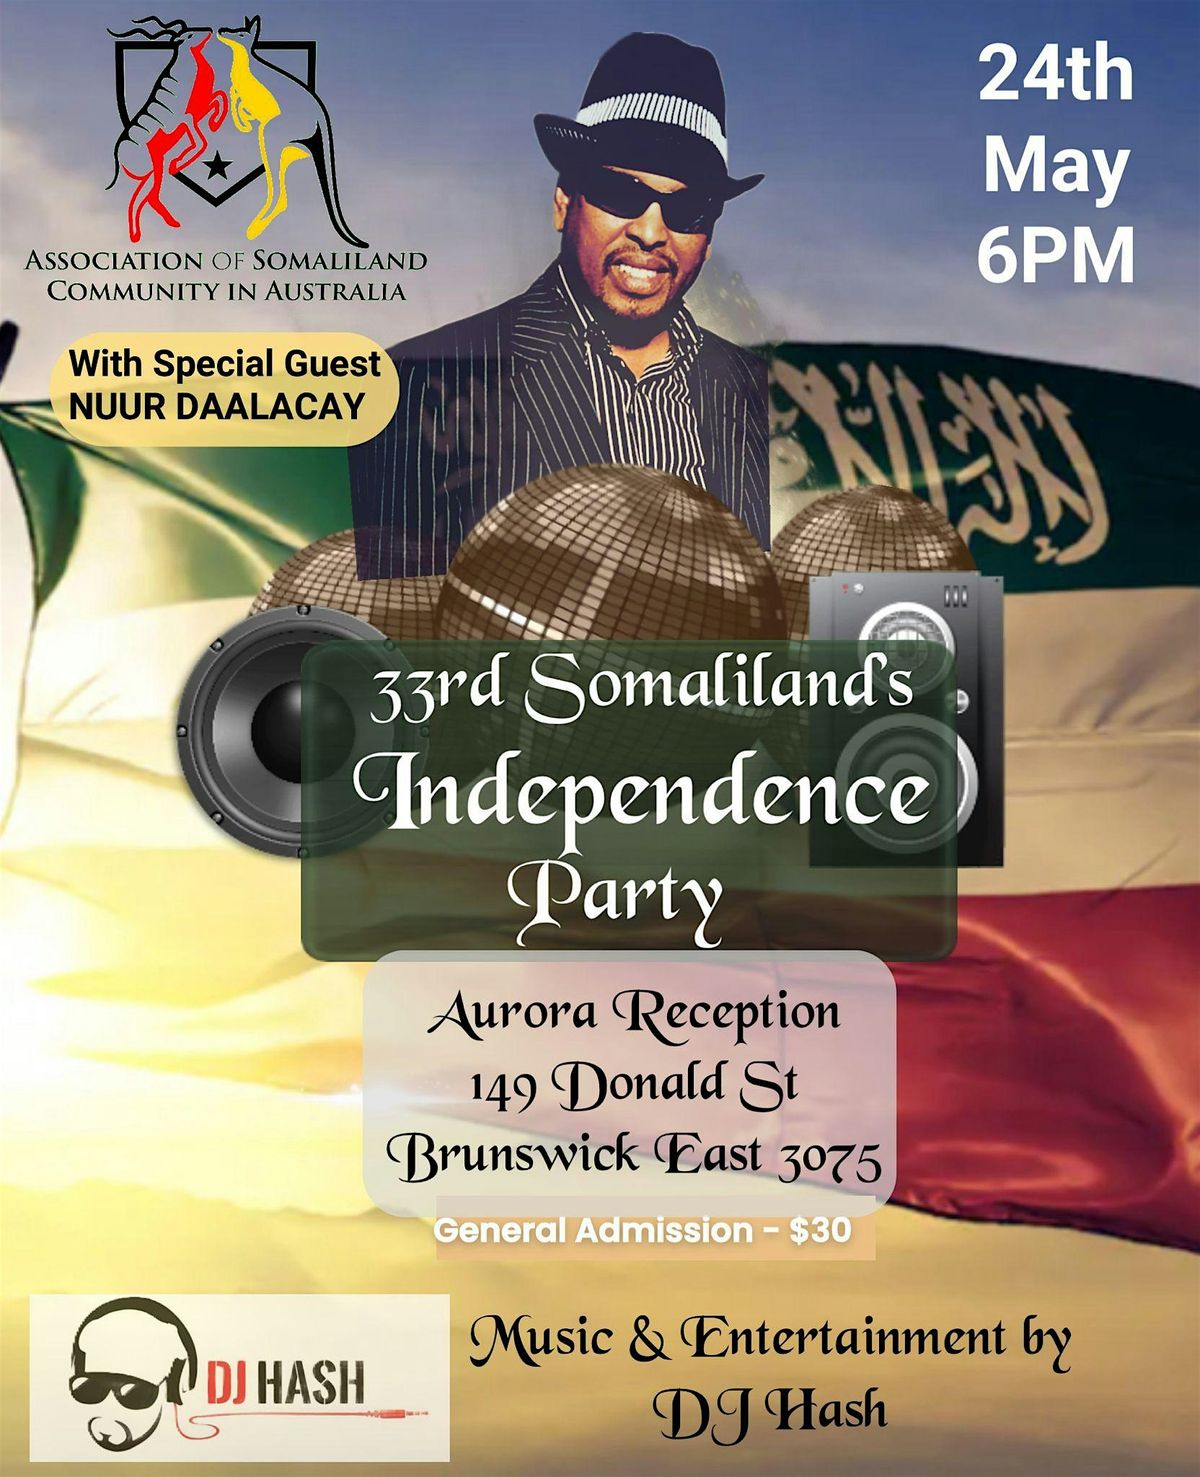 Somaliland's 33rd Independence Party